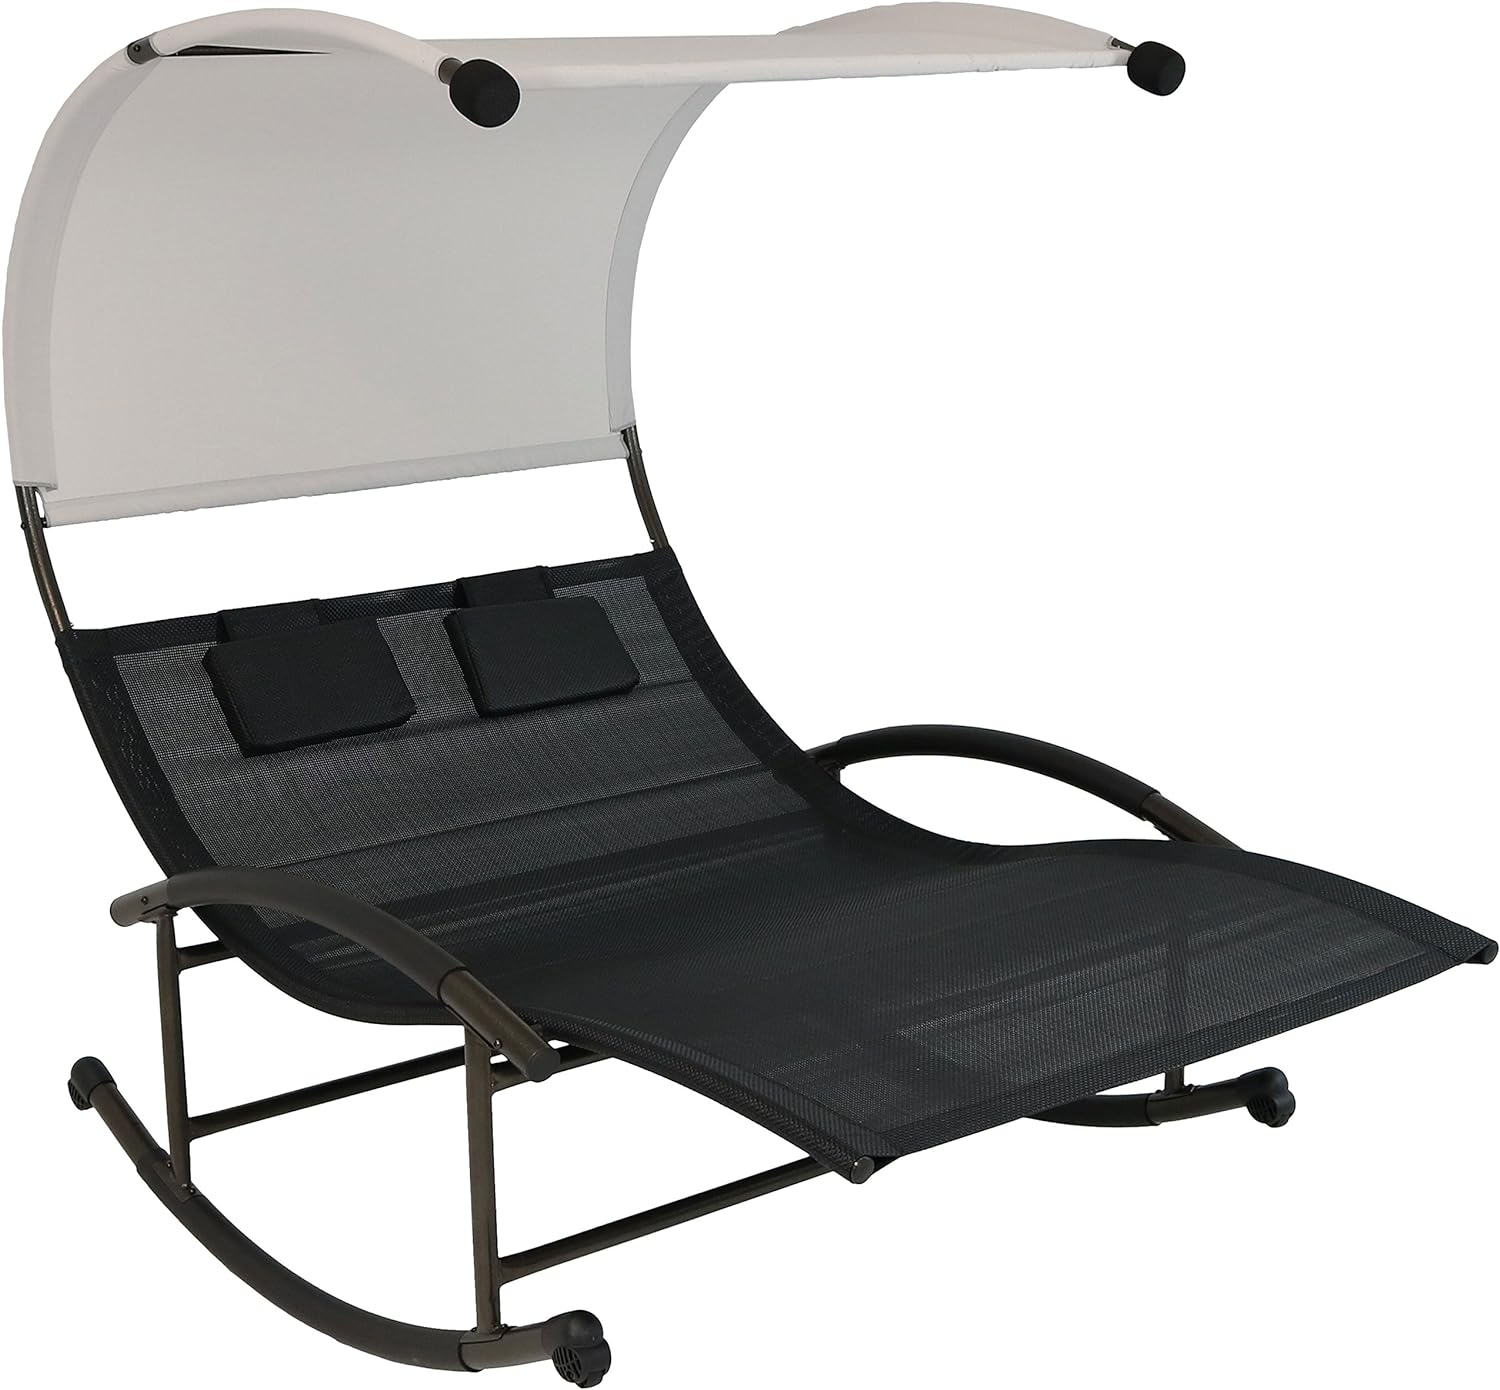 Sunnydaze Outdoor Double Chaise Rocking Lounge Chair with Canopy and Headrest Pillows - Black and White with Powder-Coated Frame